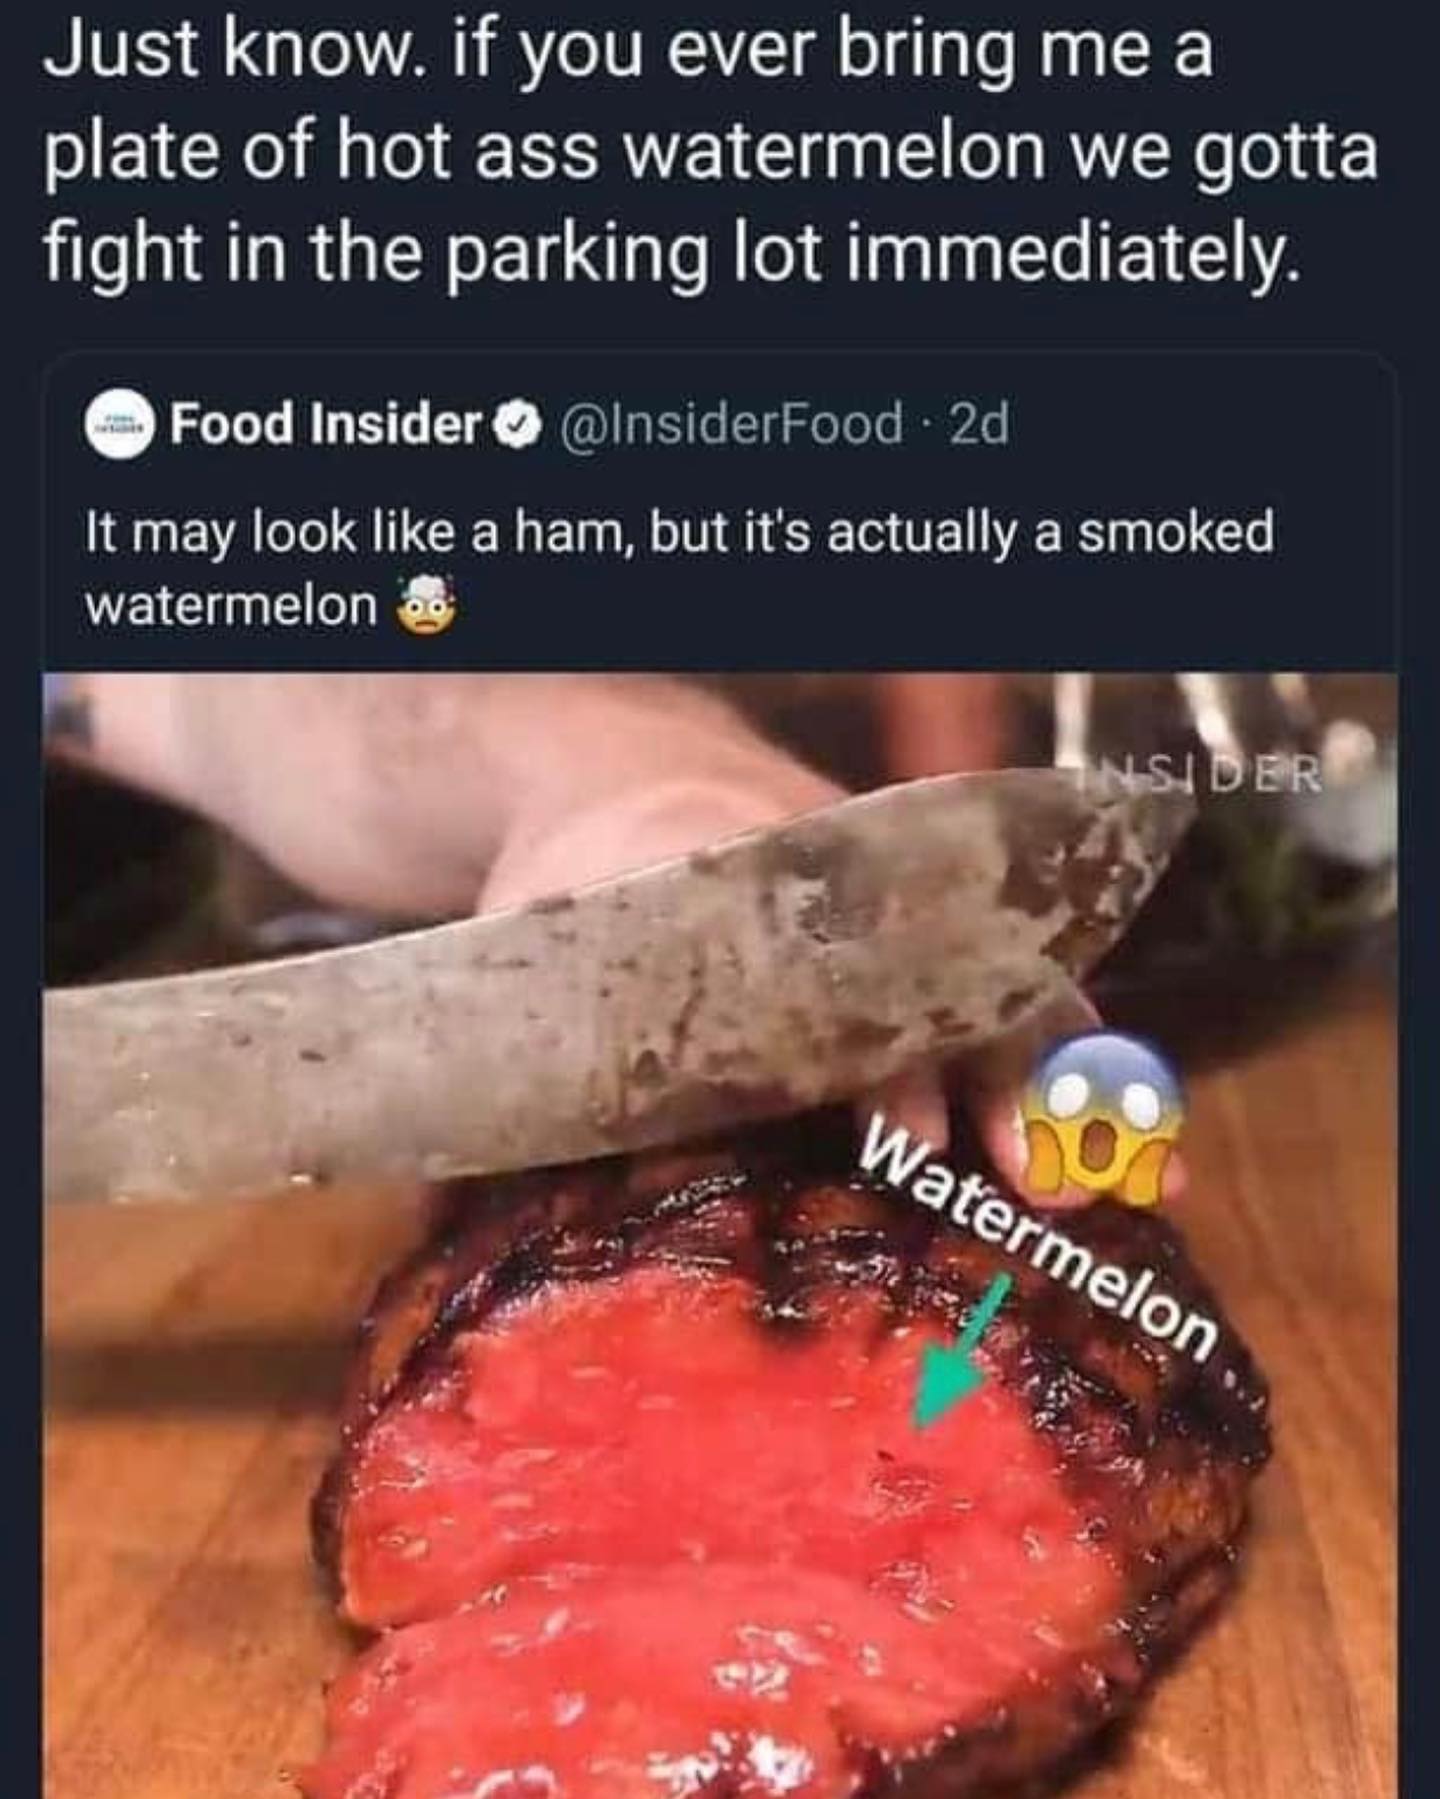 dank memes - meat - Just know. if you ever bring me a plate of hot ass watermelon we gotta fight in the parking lot immediately. Food Insider 2d It may look a ham, but it's actually a smoked watermelon Insider Watermelon